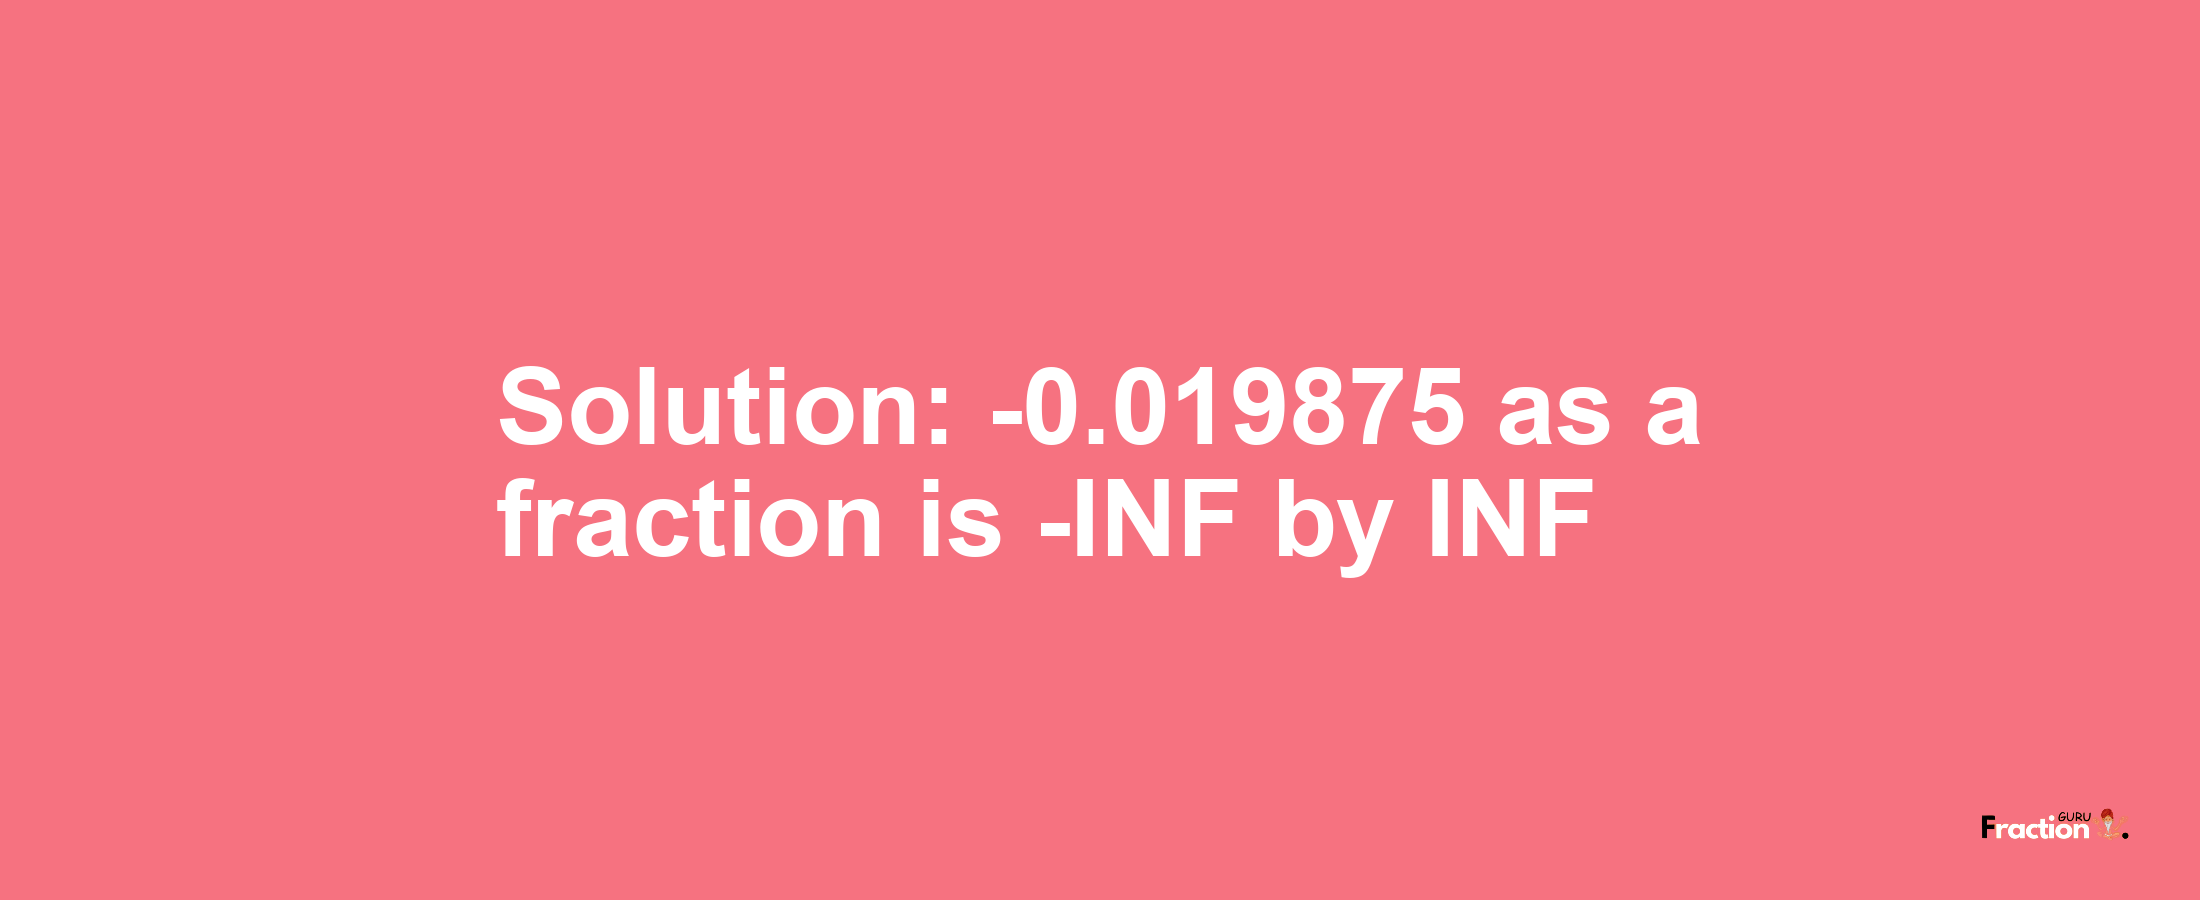 Solution:-0.019875 as a fraction is -INF/INF